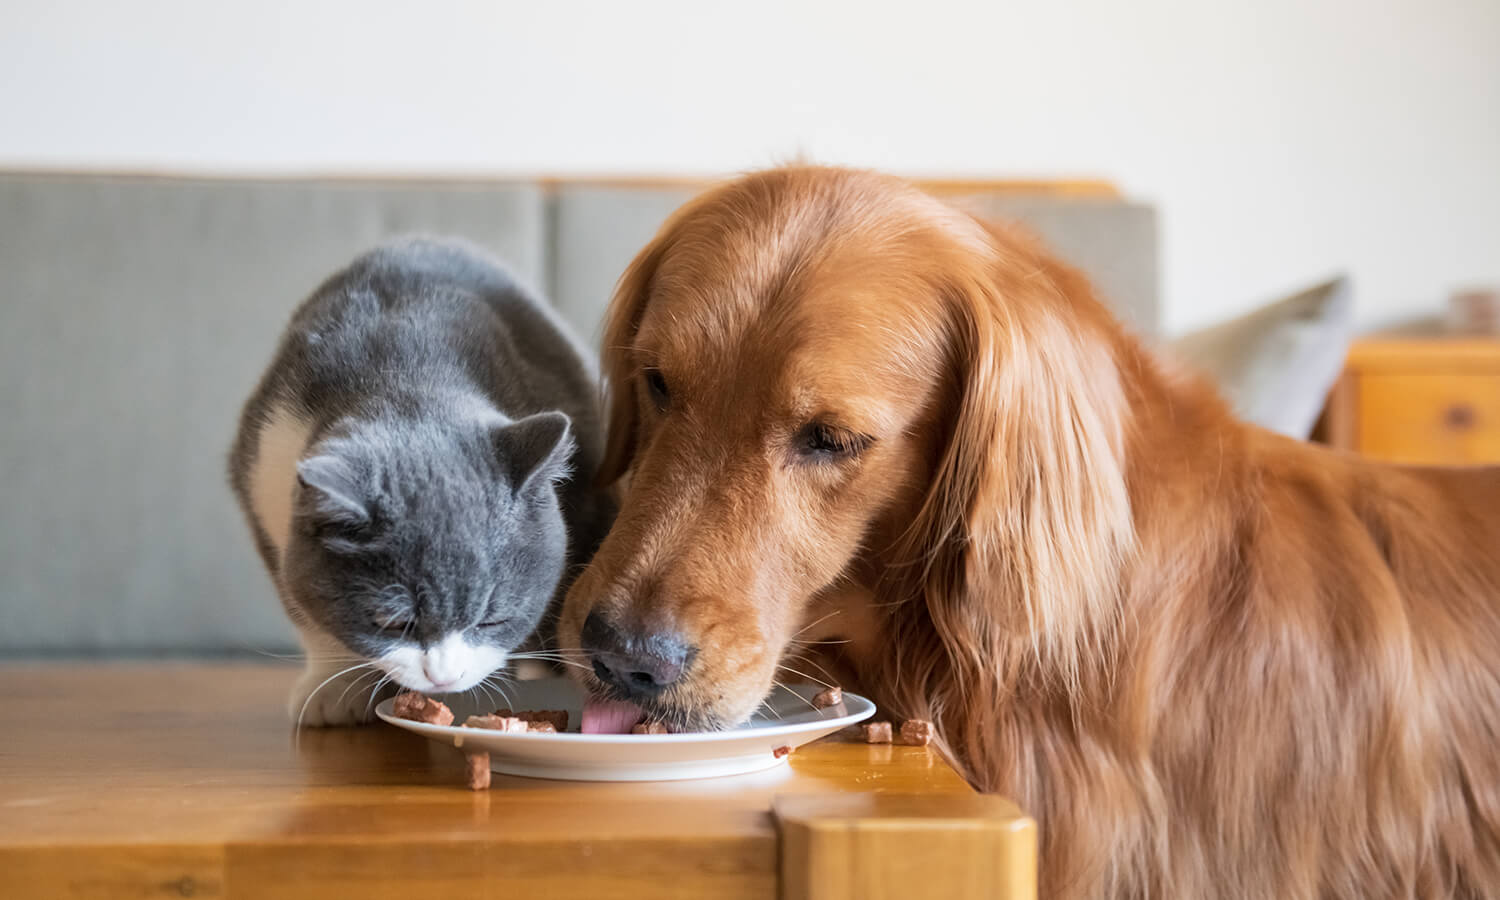 A cat and dog sharing a plate of food